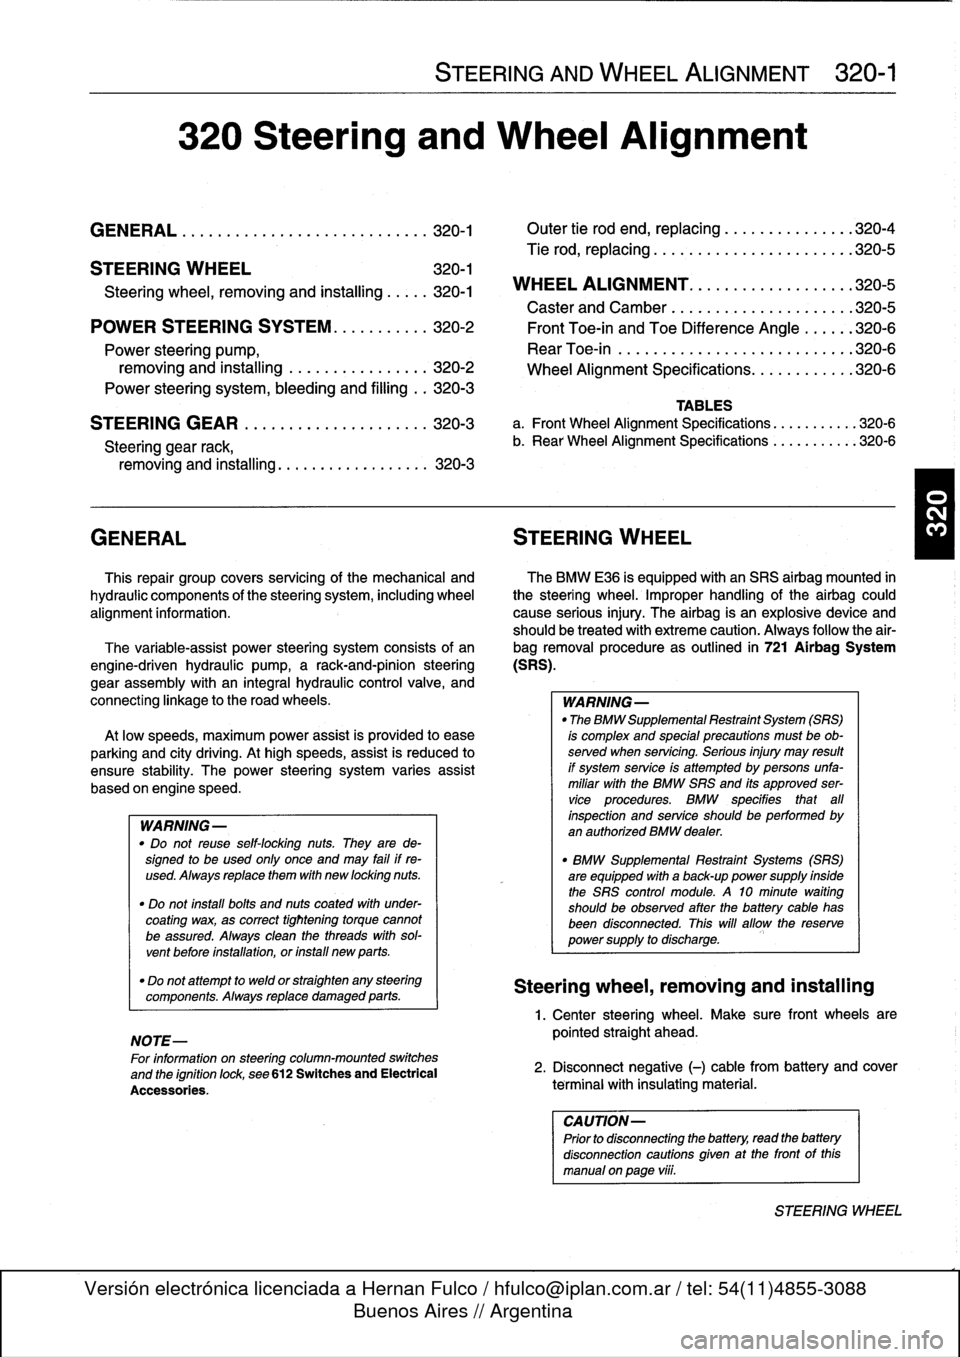 BMW 318i 1997 E36 Workshop Manual 
320
Steering
and
Wheel
Alignment

GENERAL
...
.
.
.
...
.
....
.
.
.
.
.
.
.
.
.
...
.
.
320-1

	

Outer
tie
rod
end,
replacing
.
...
.
.
.
.
.
.
.
...
.
320-4

Tie
rod,
replacing
.
.
.
.
.
.
.
.....